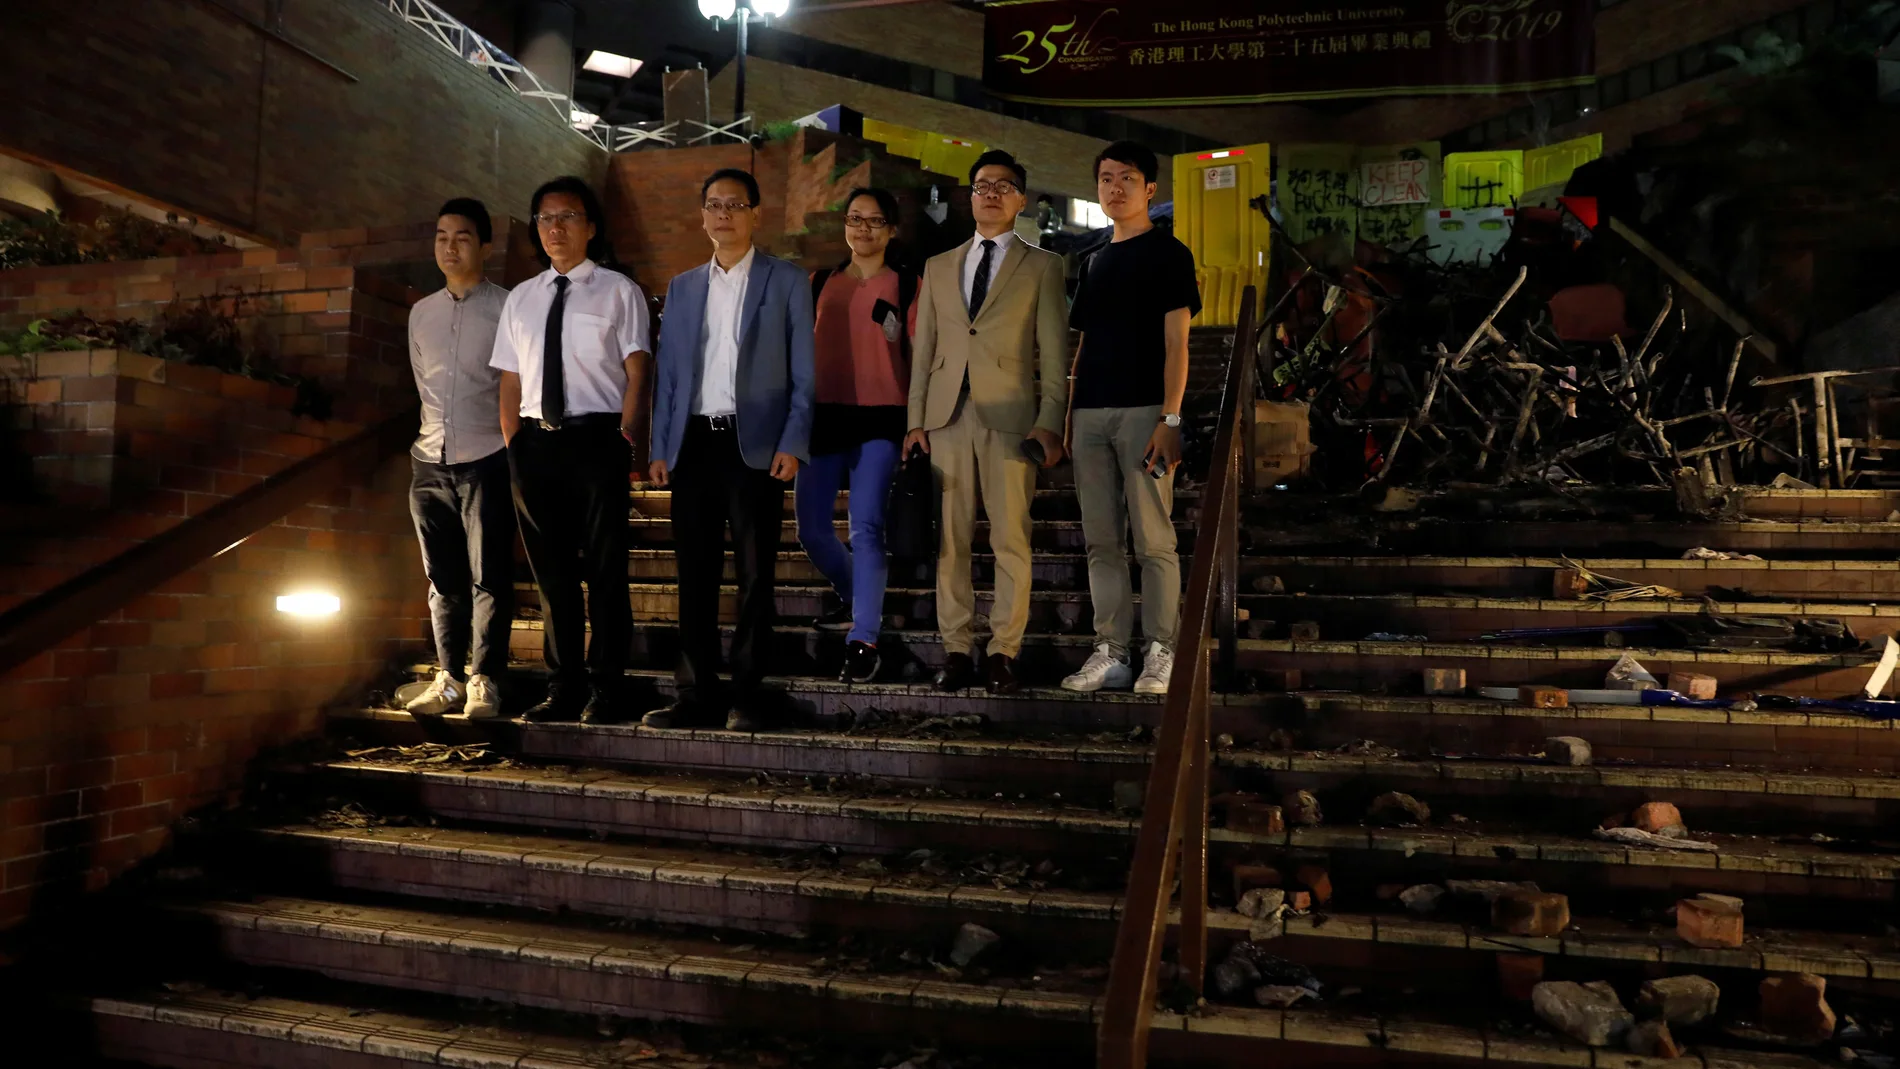 Pro-democratic lawmakers are pictured after meeting with protesters at the Polytechnic University (PolyU) in Hong Kong